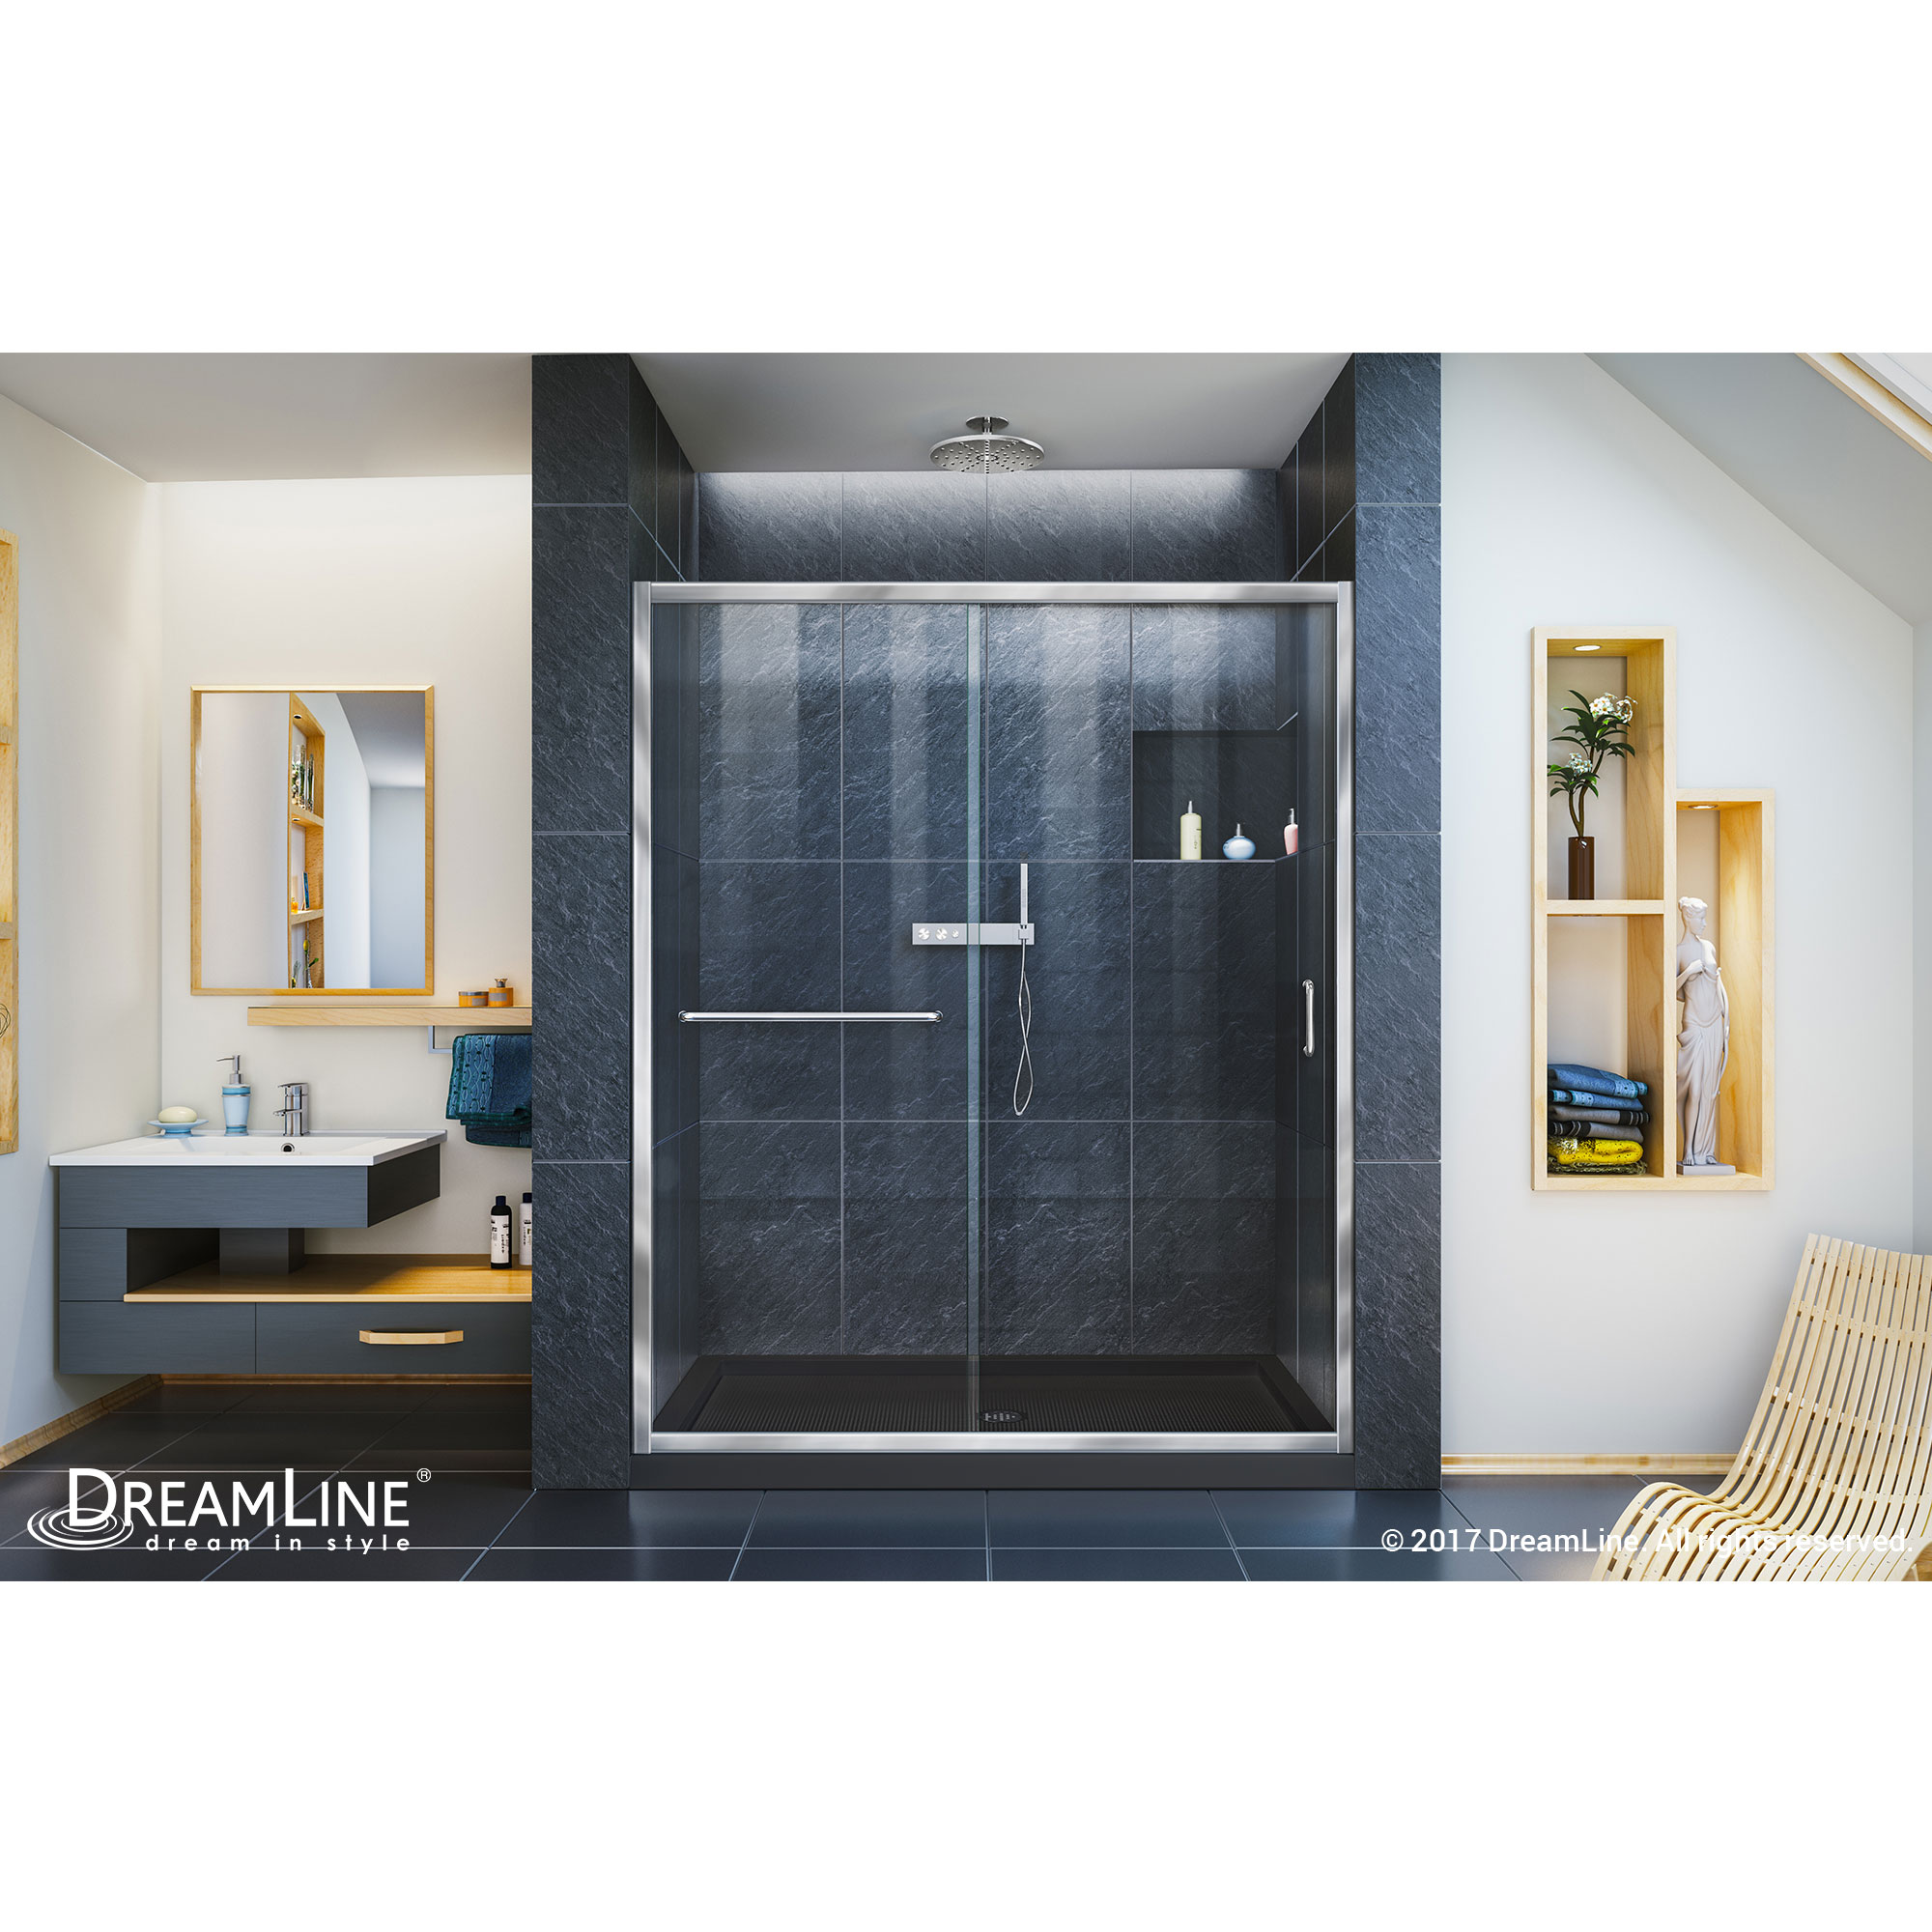 DreamLine Infinity-Z 36 in. D x 60 in. W x 74 3/4 in. H Clear Sliding Shower Door in Chrome and Center Drain Black Base